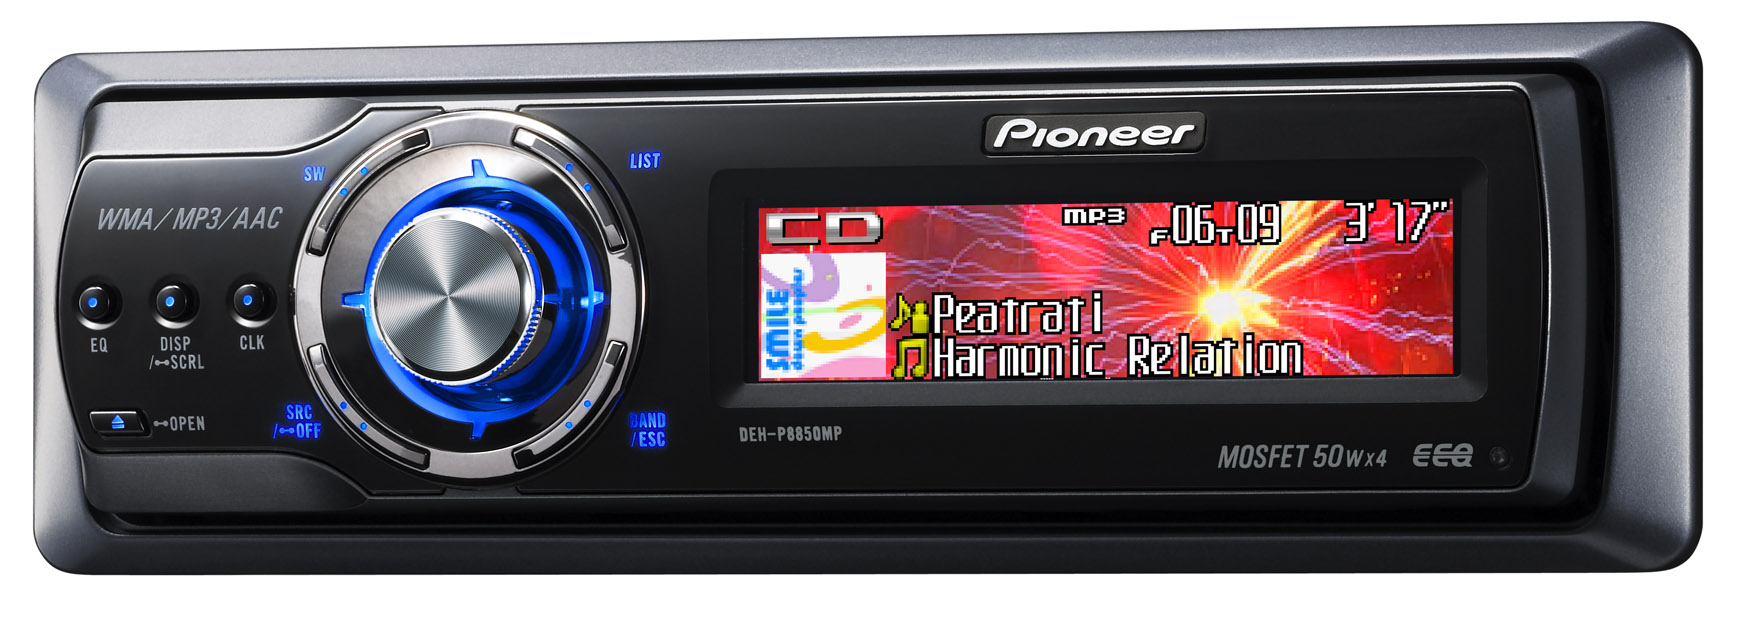 Pioneer DEH-P8850 MP CD MP3 ACC PLAYER large image 0